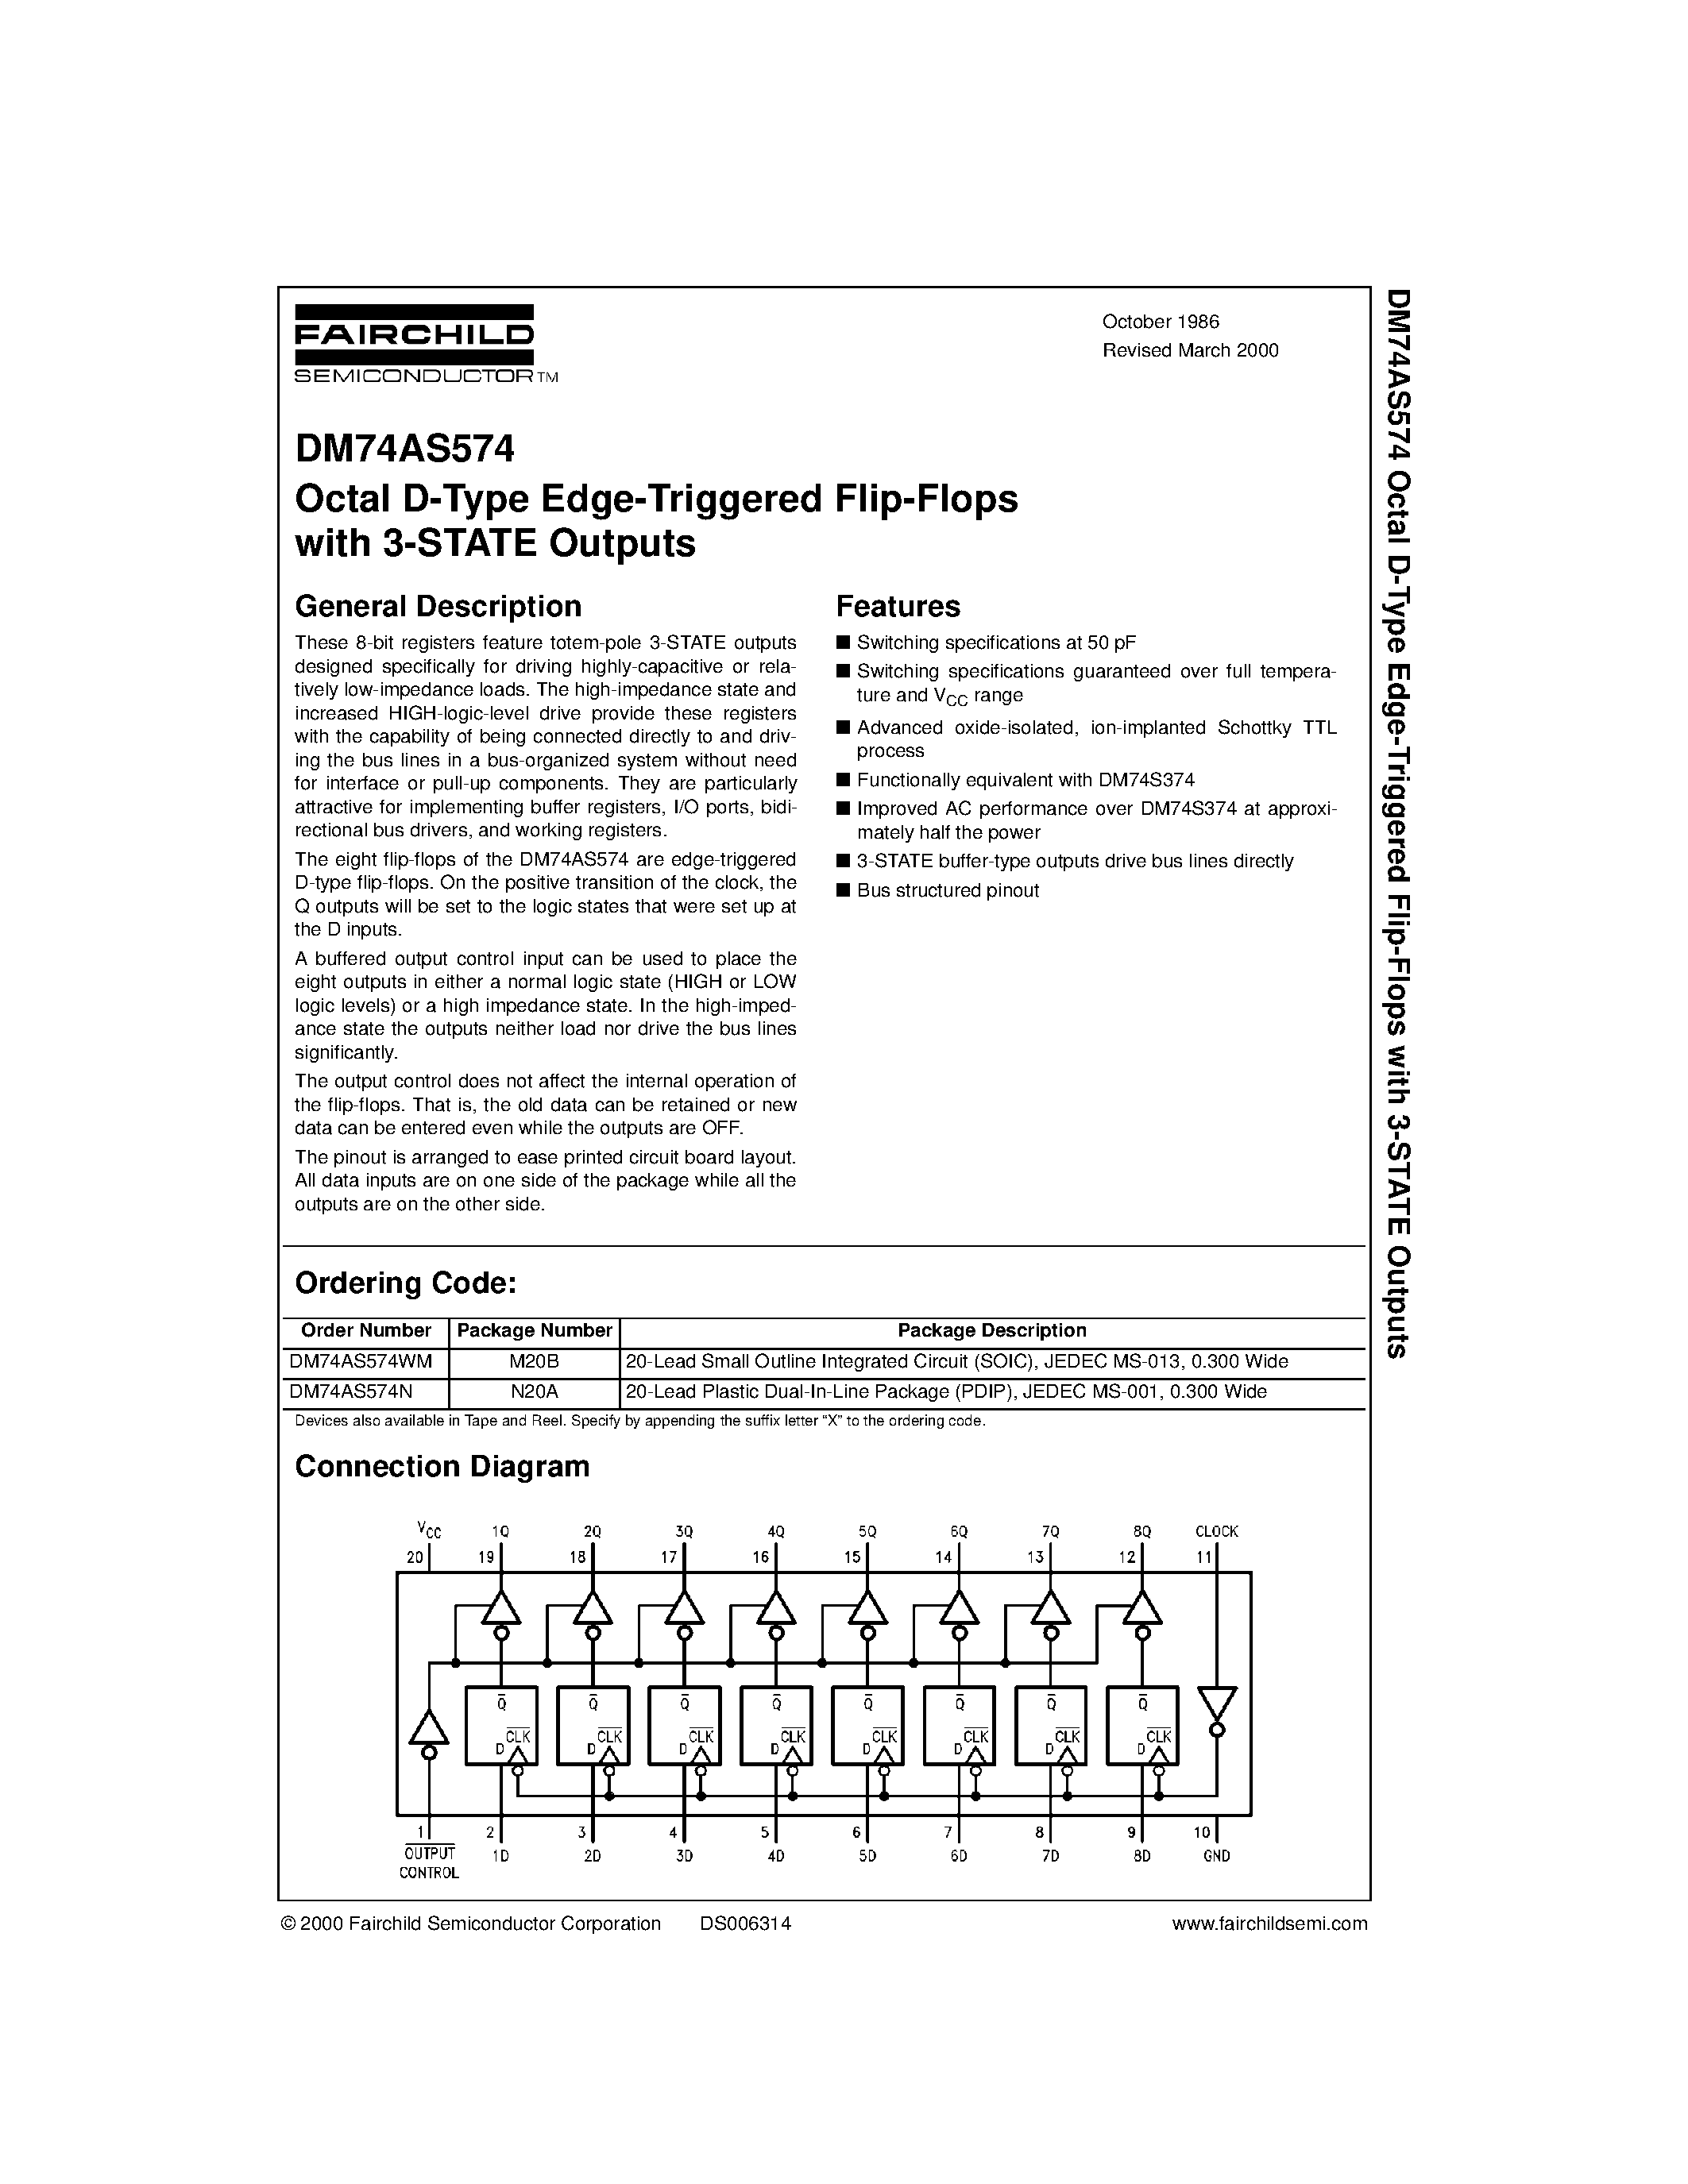 Datasheet DM74AS574 - Octal D-Type Edge-Triggered Flip-Flops with 3-STATE Outputs page 1